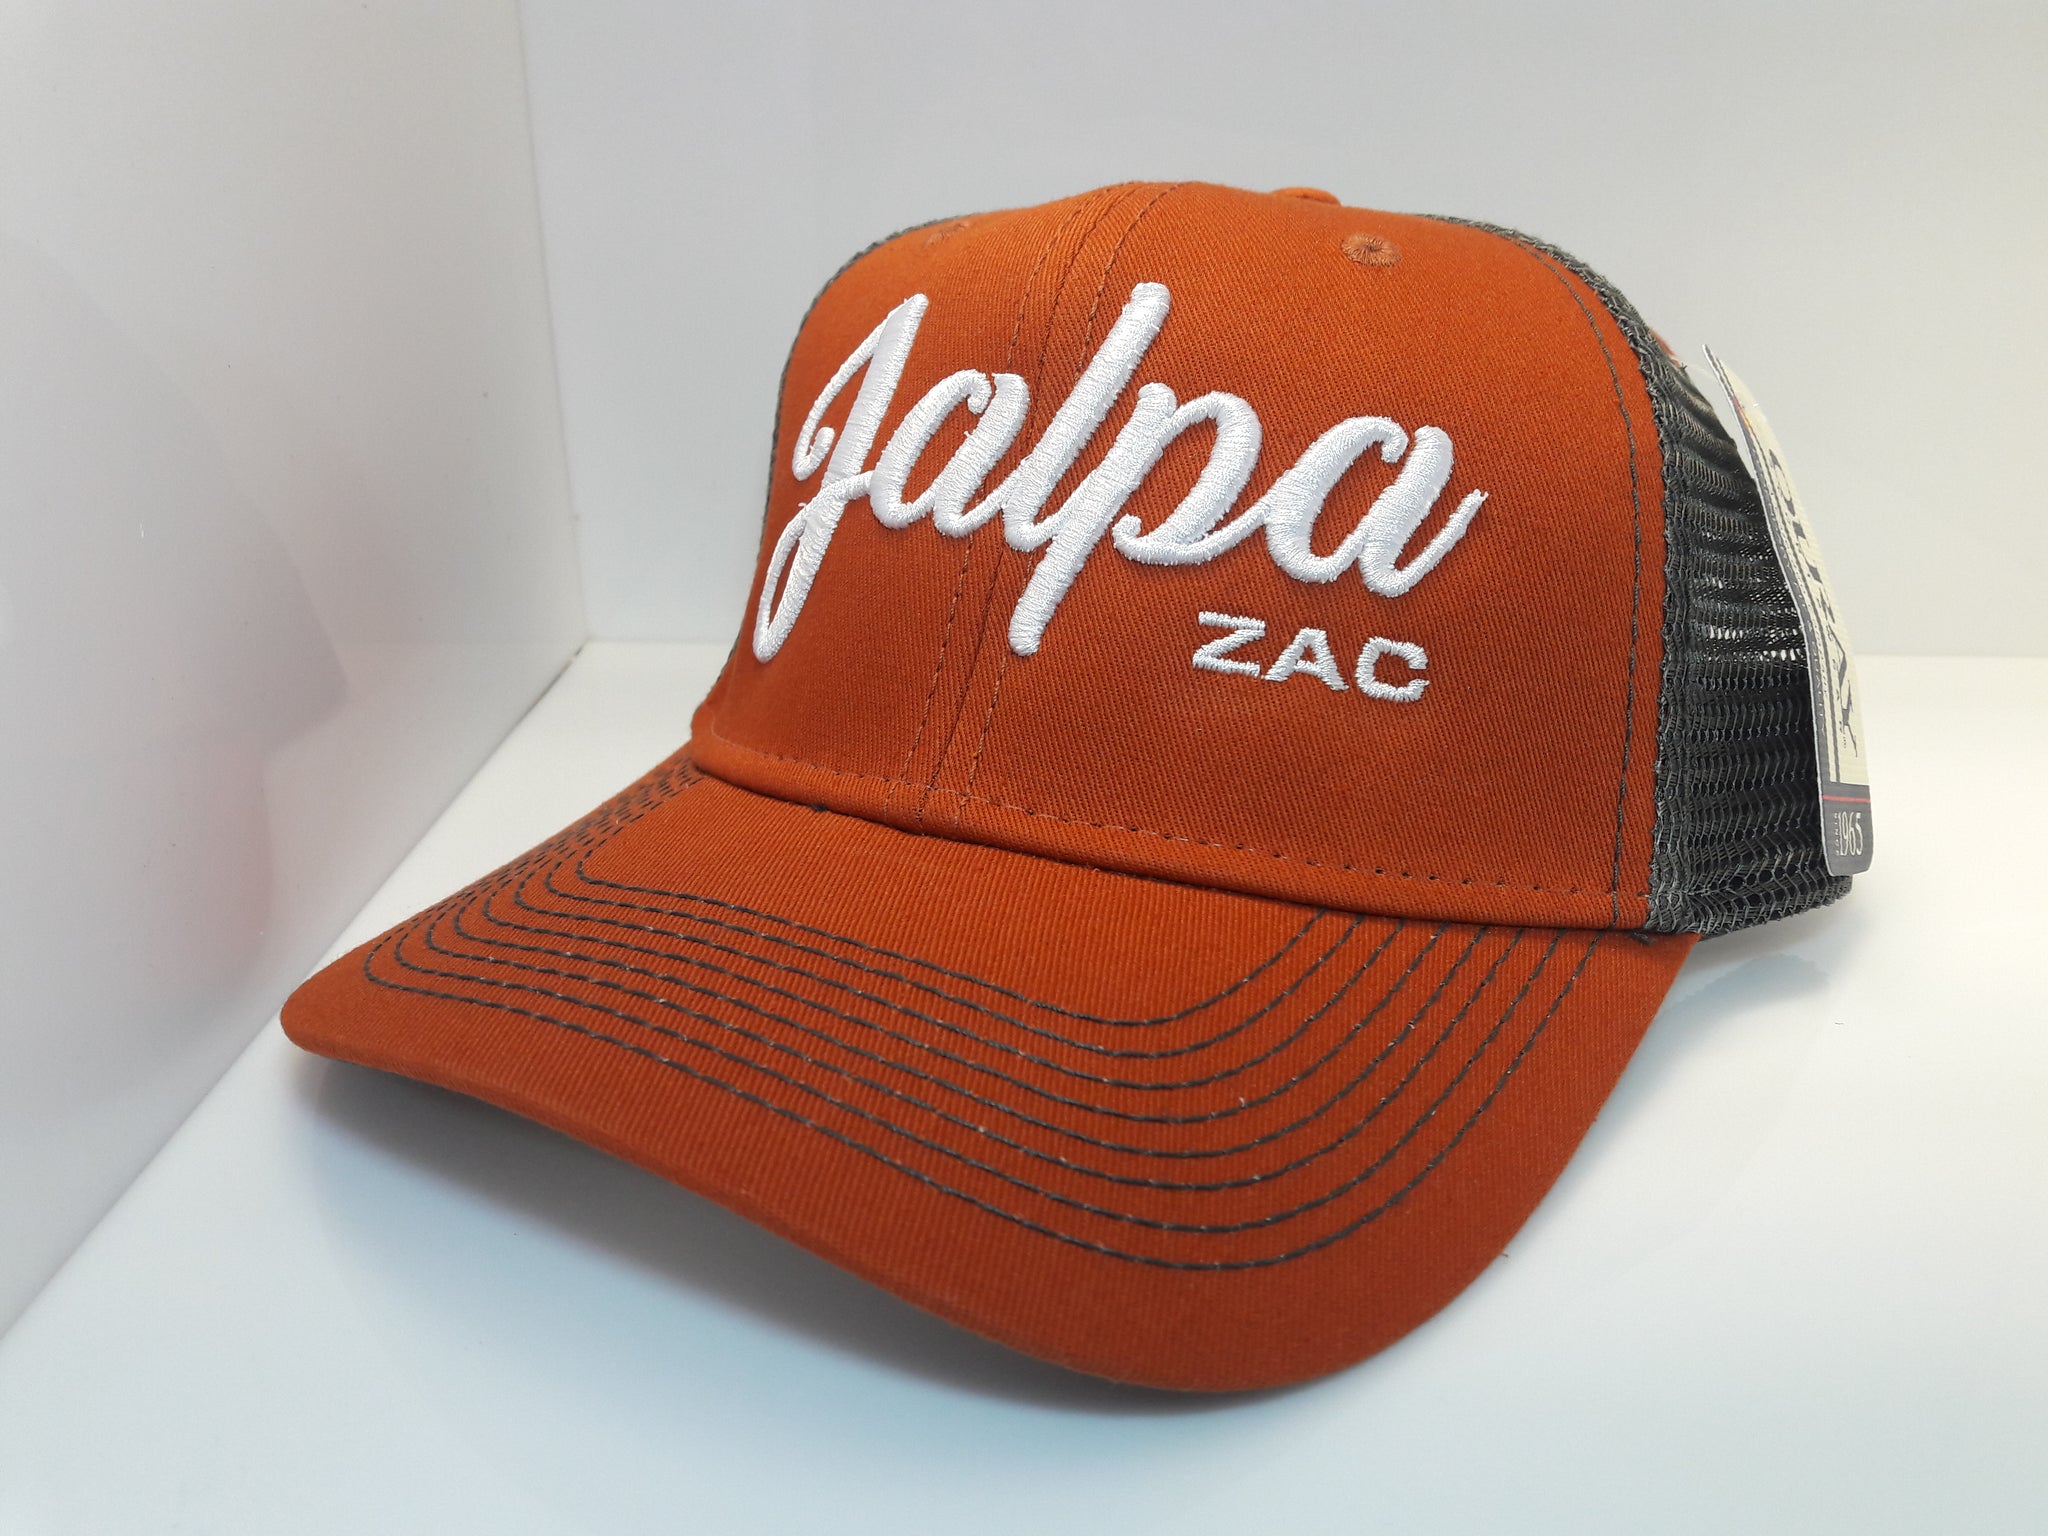 3D Embroidered Vintage Rust and Dark Grey Jalpa Zac Ouray - Sideline Mesh Cap